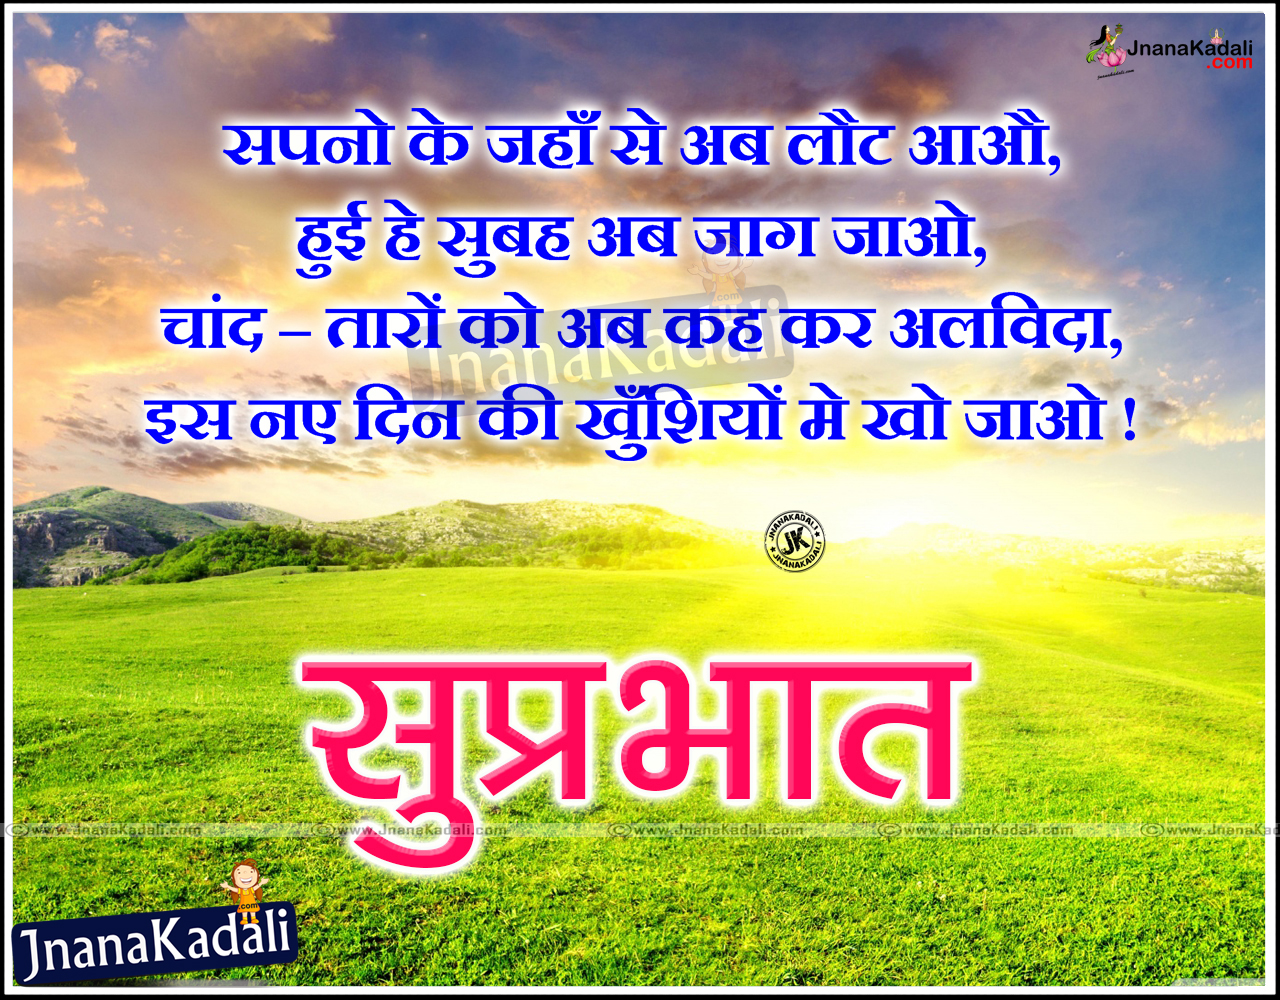 Suprabhat-Hindi-good-morning-wishes-pictures-10.jpg